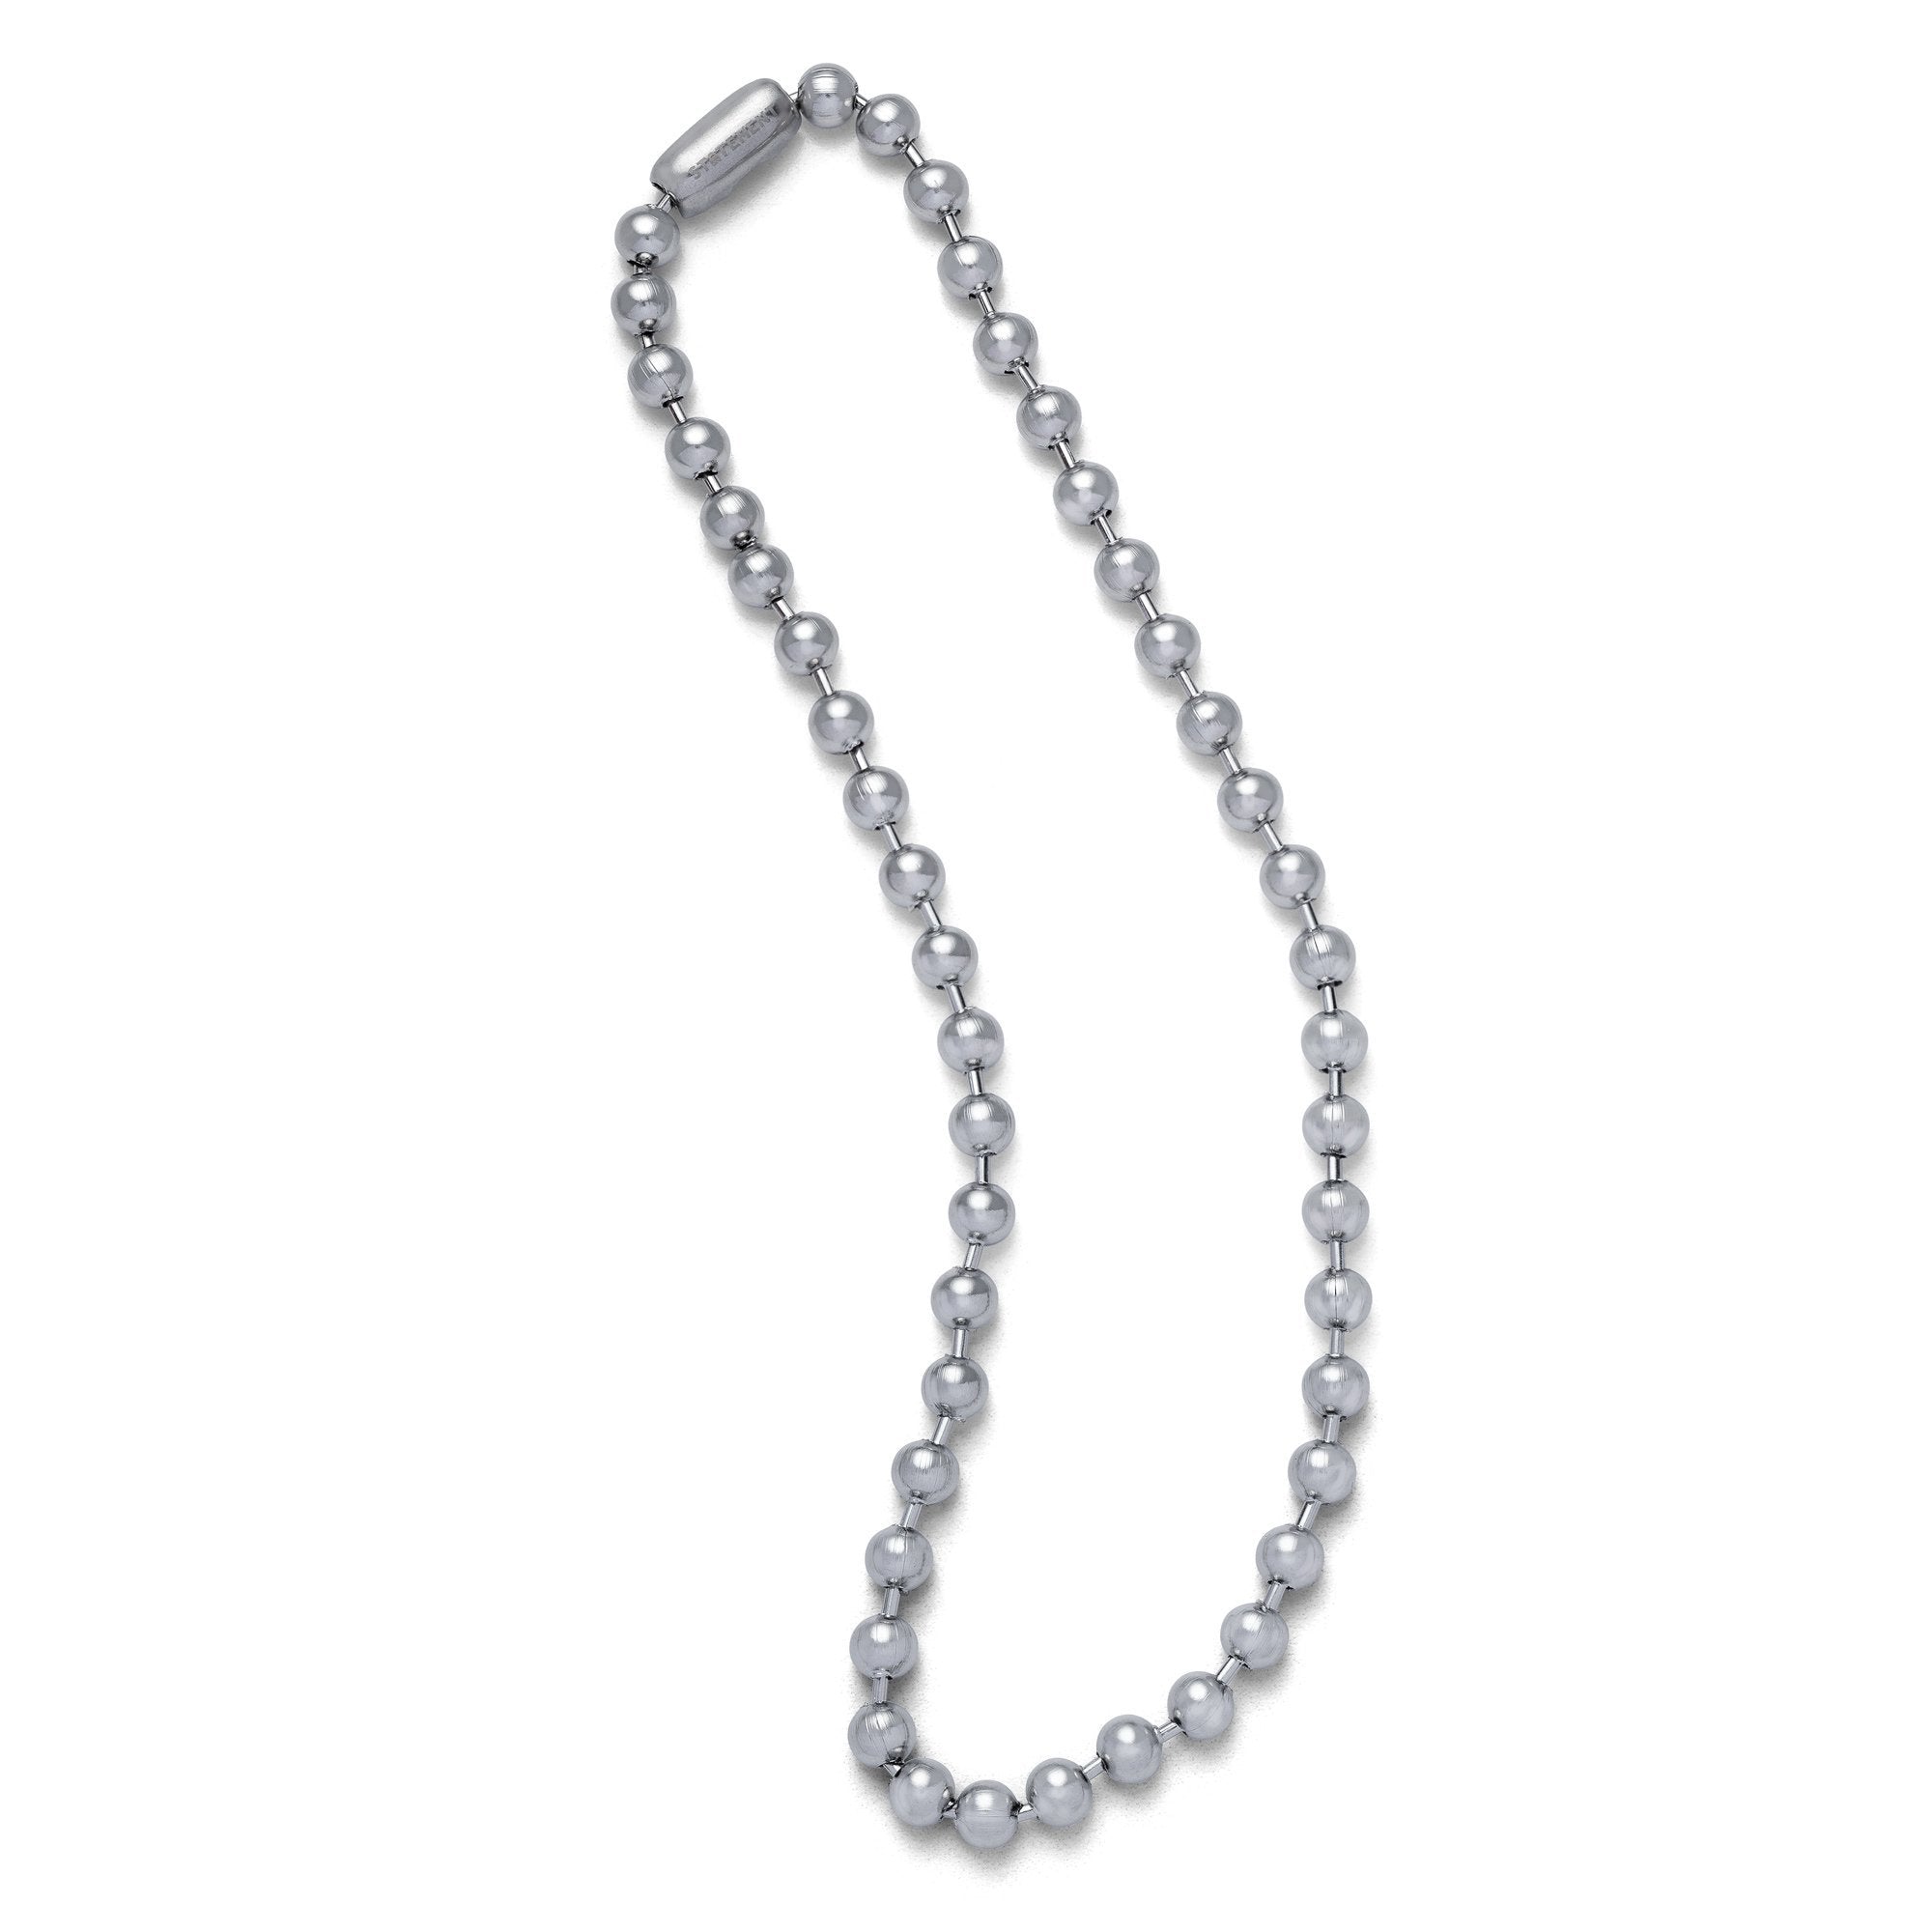 Buy Extra Large Ball Chain Necklace Choker 12mm Stainless Steel Oversized  Offered in Lengths 14 36 14 16 18 20 24 30 36 or Custom Online in India -  Etsy